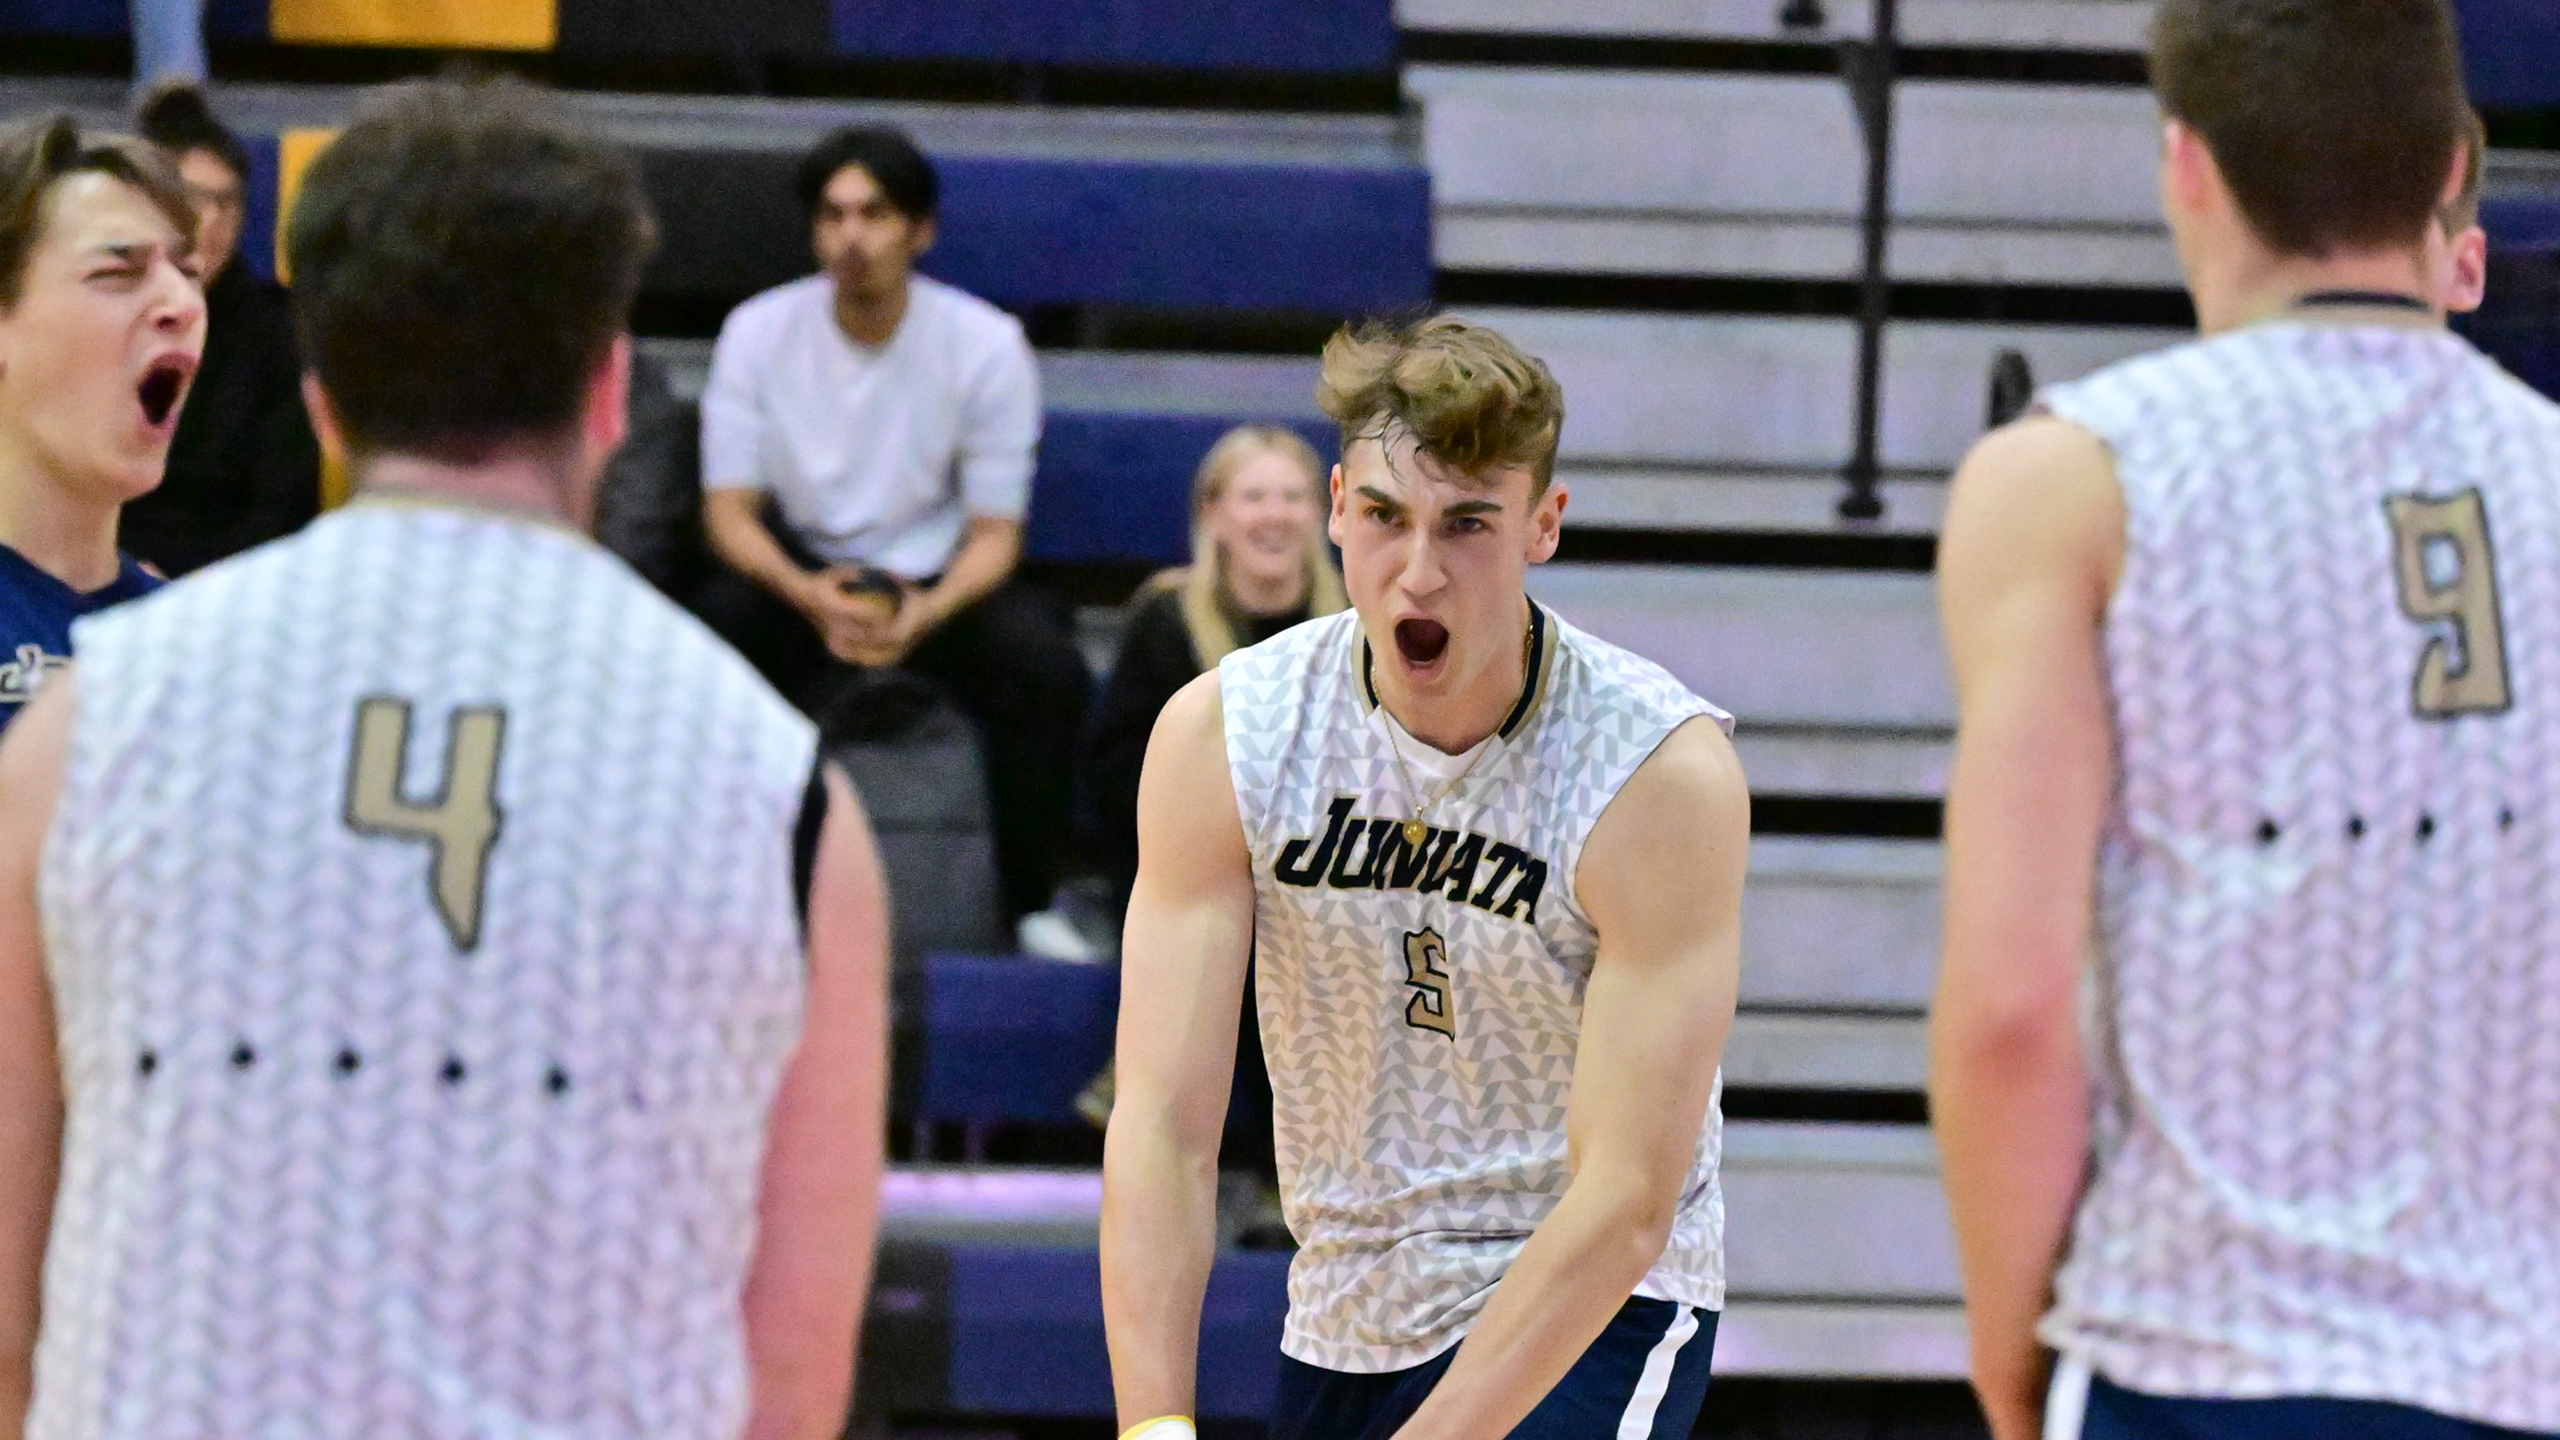 Men's Volleyball Wraps Up Regular Season with Two Wins as Goldsborough Claims Program Record for Career Aces